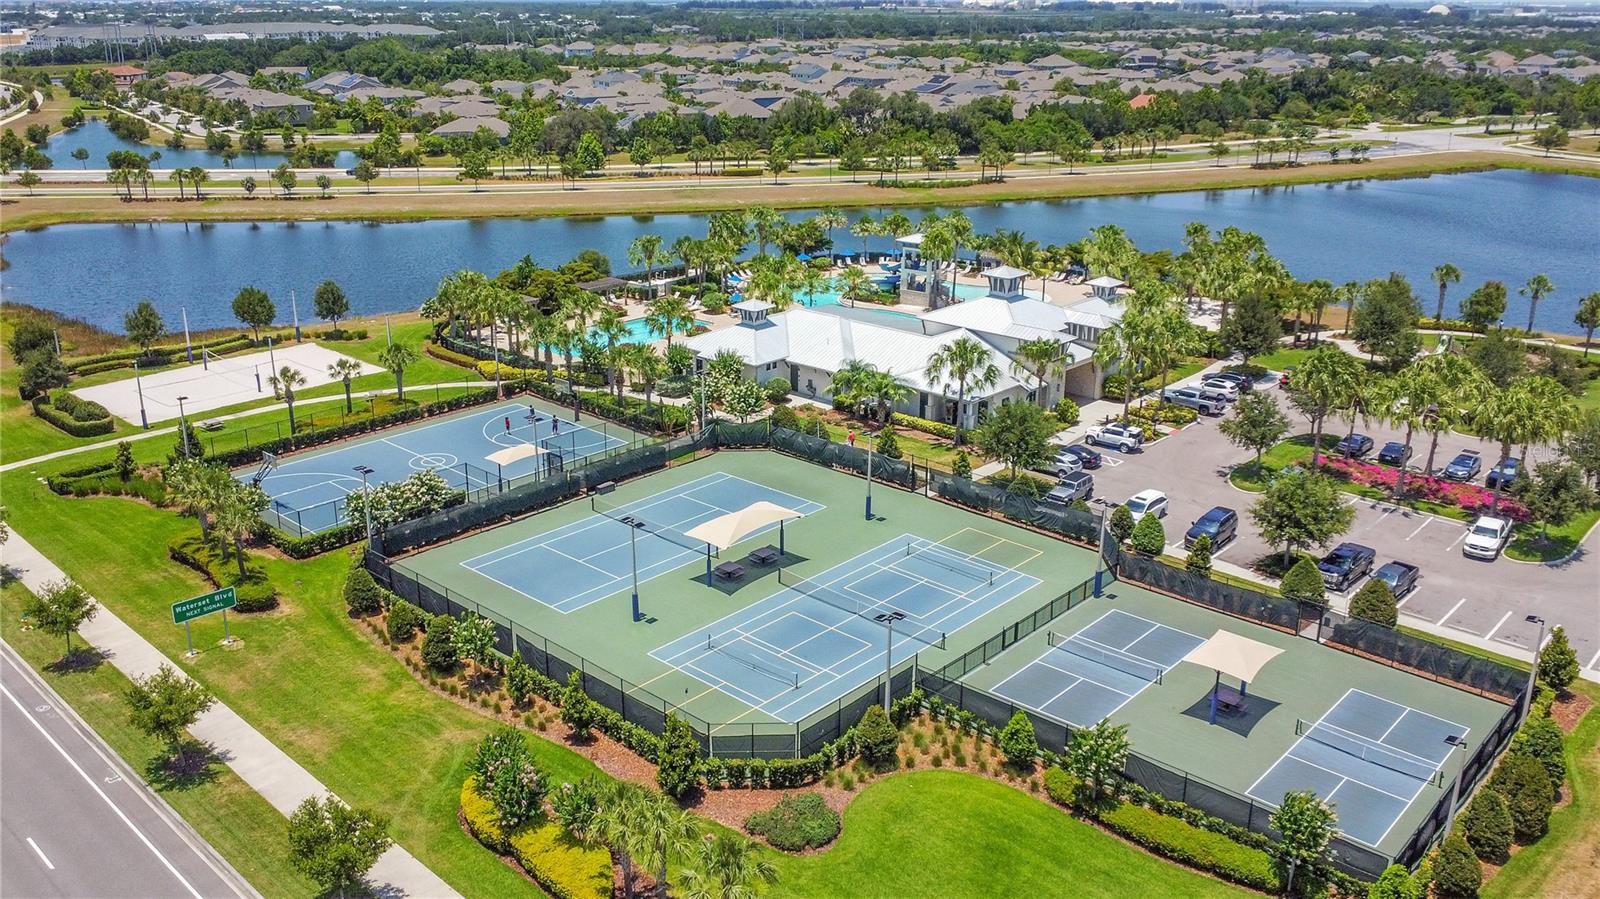 Tennis, Basketball, Pickleball, and Sand Volleyball Courts